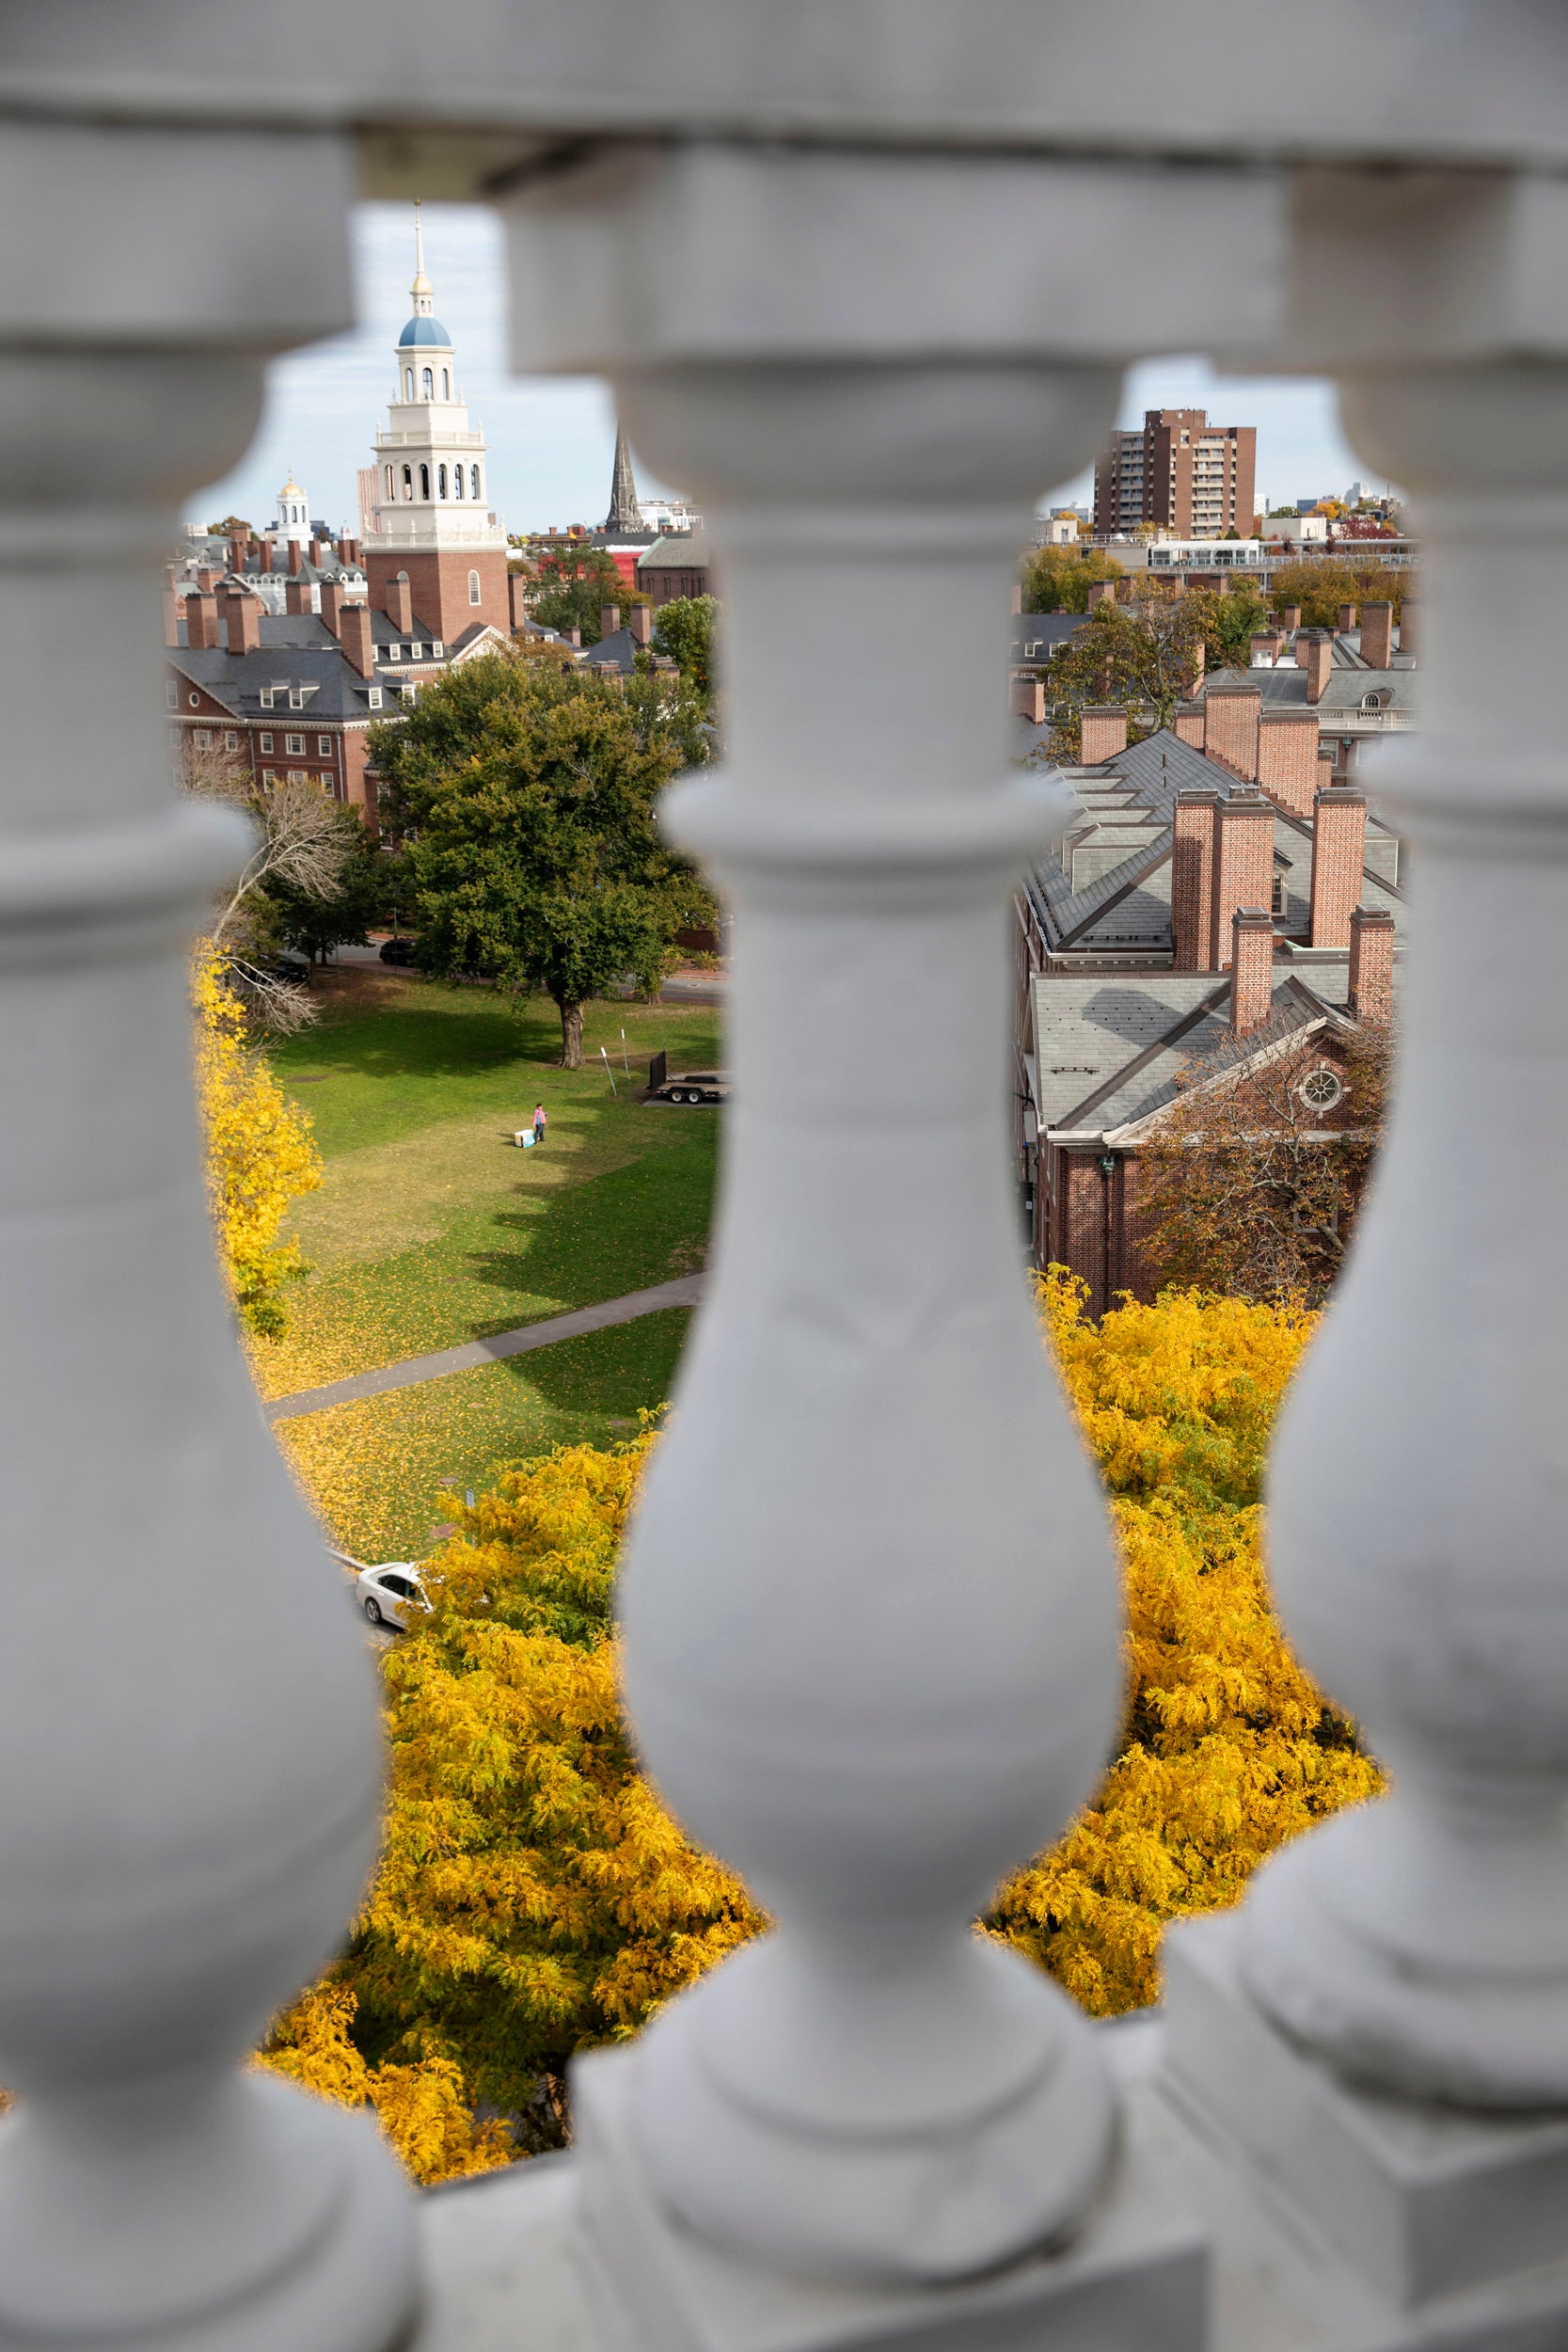 View of the MAC Quad and Lowell House from Eliot House tower.